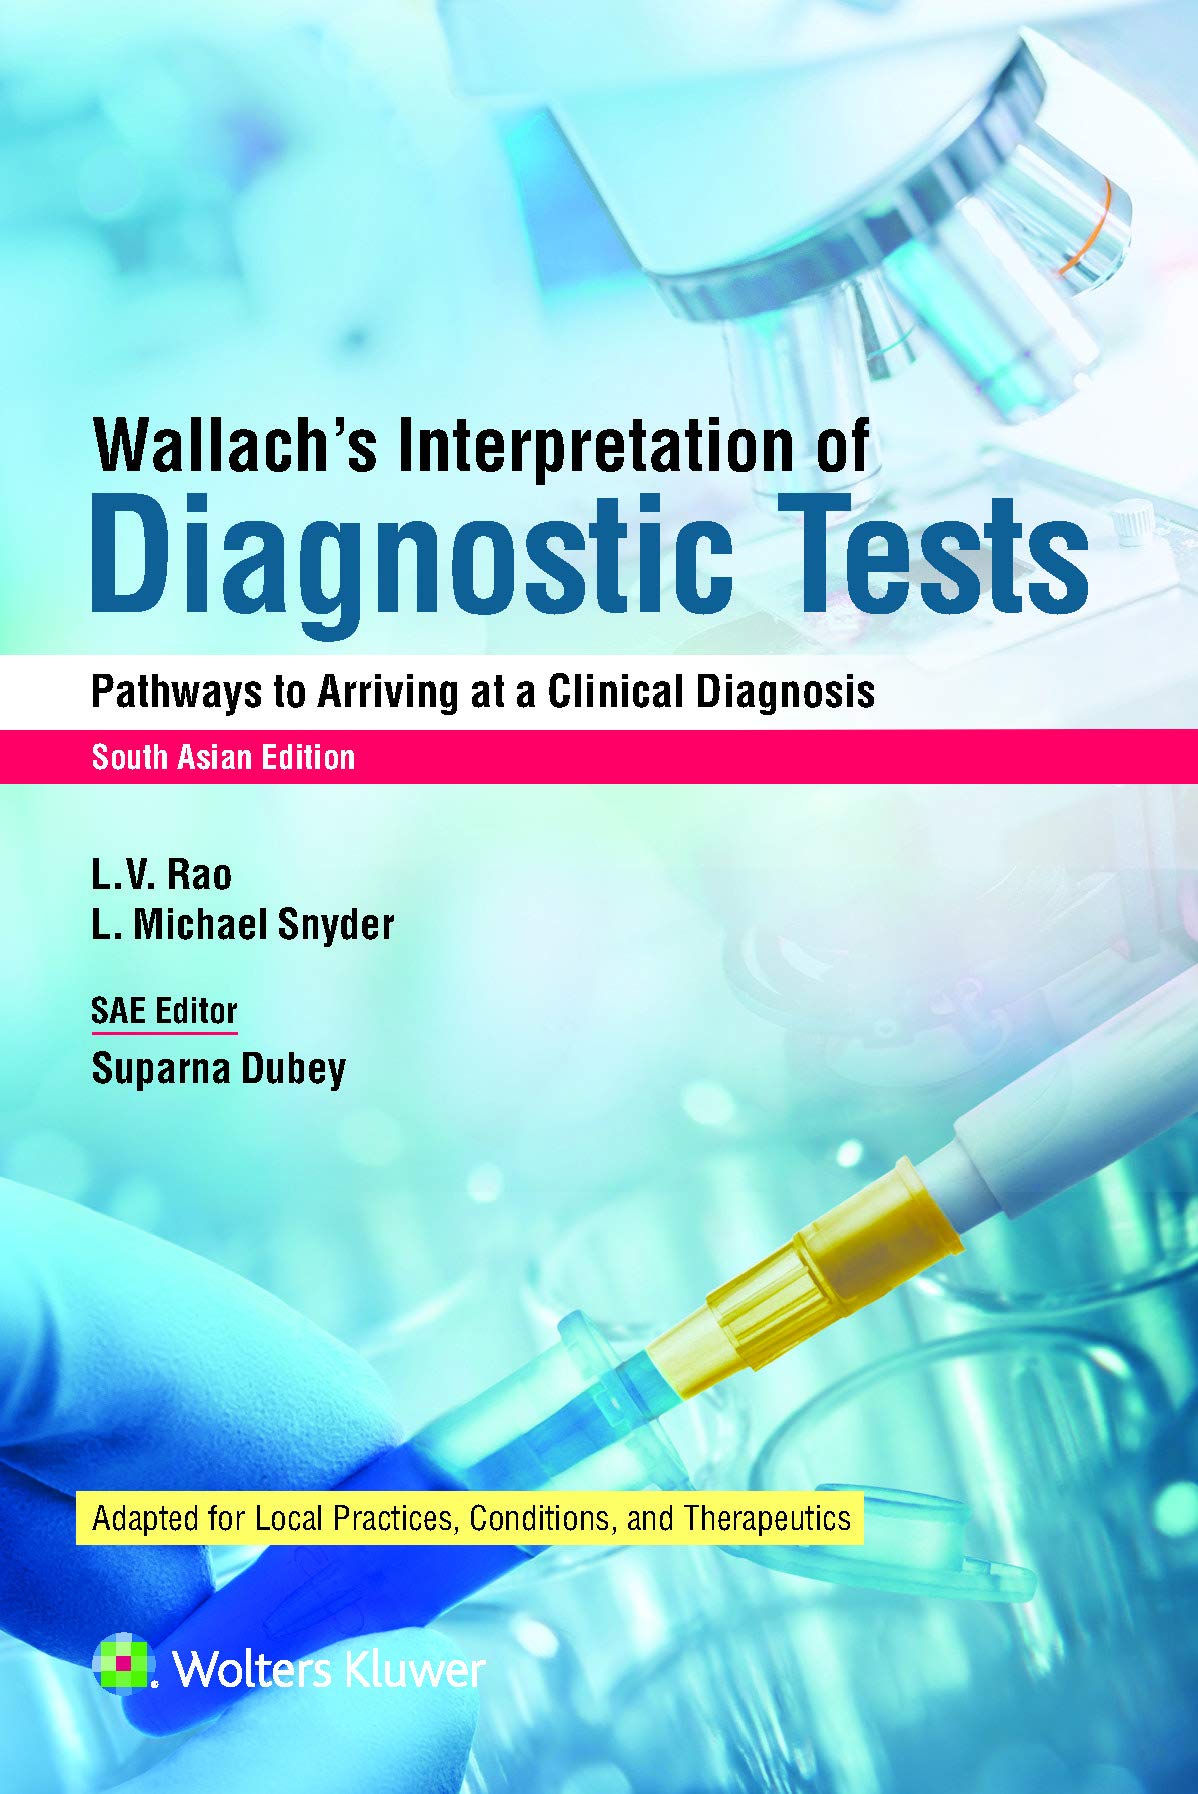 Wallach’s Interpretation of Diagnostic Tests, South Asian Edition by Suparna Dubey